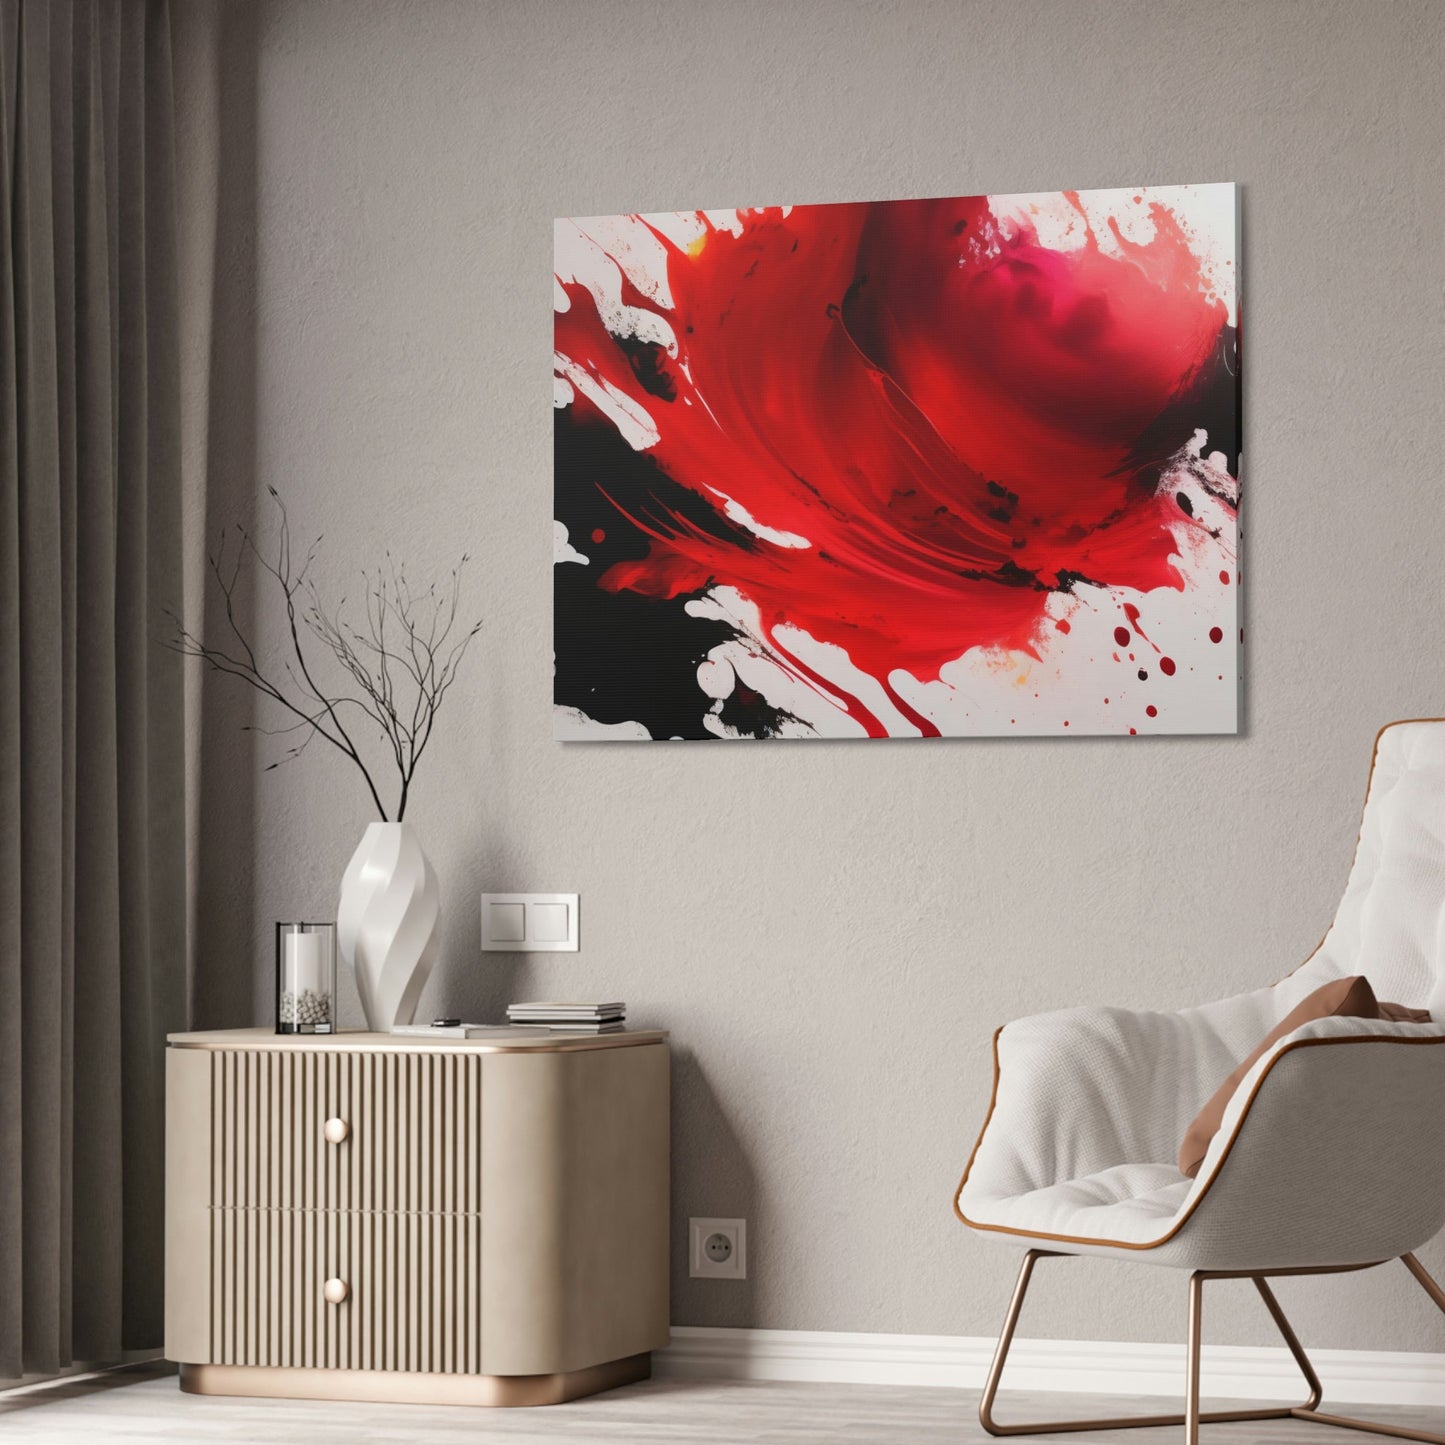 The Art of Boldness: Red Abstract Prints and Wall Art on Natural Canvas & Posters